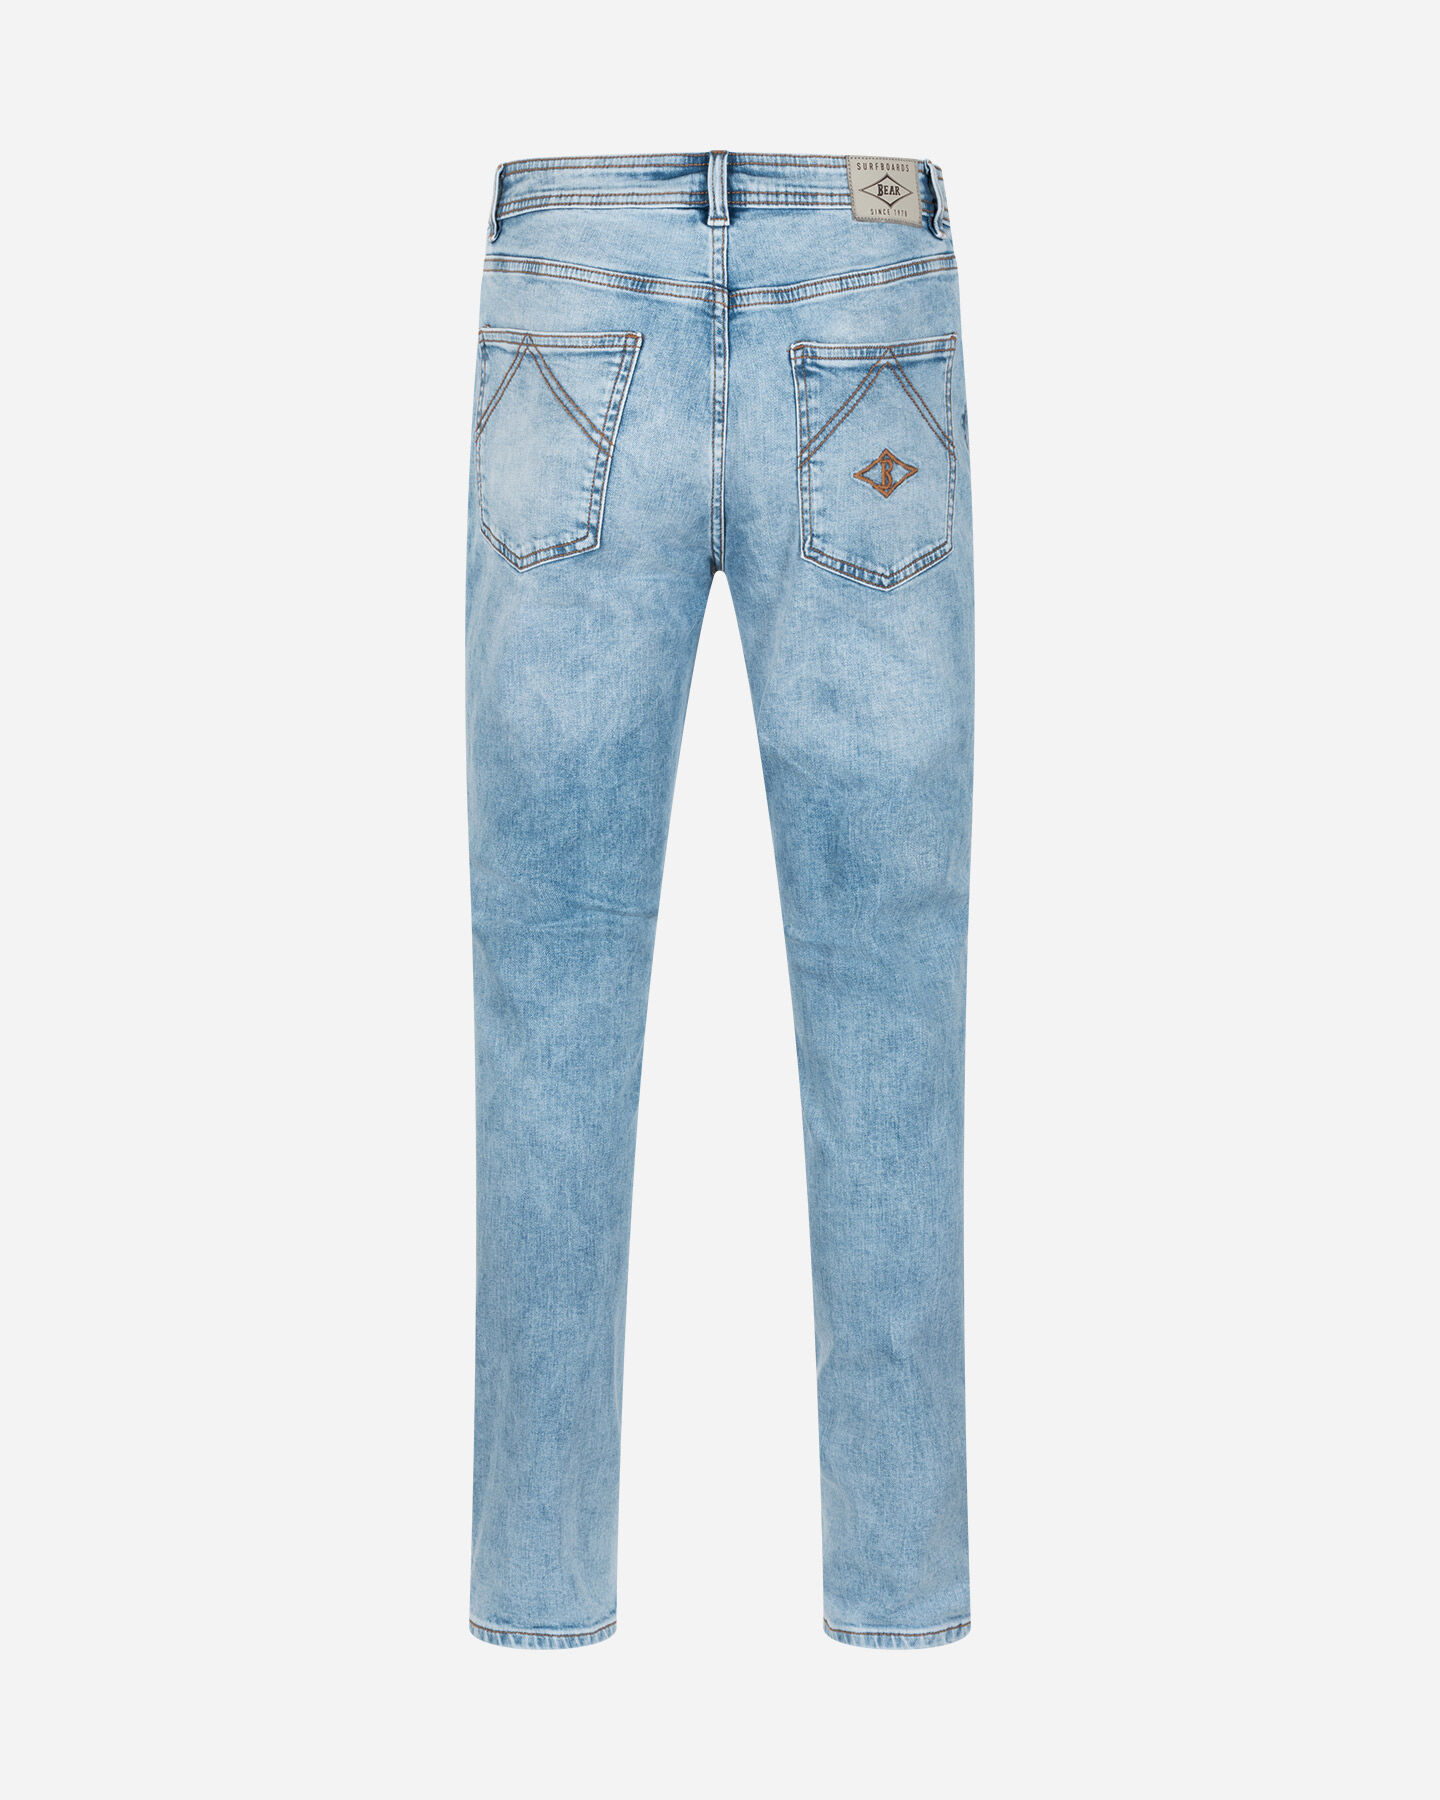  Jeans BEAR HERITAGE M S4131644|LD|44 scatto 5